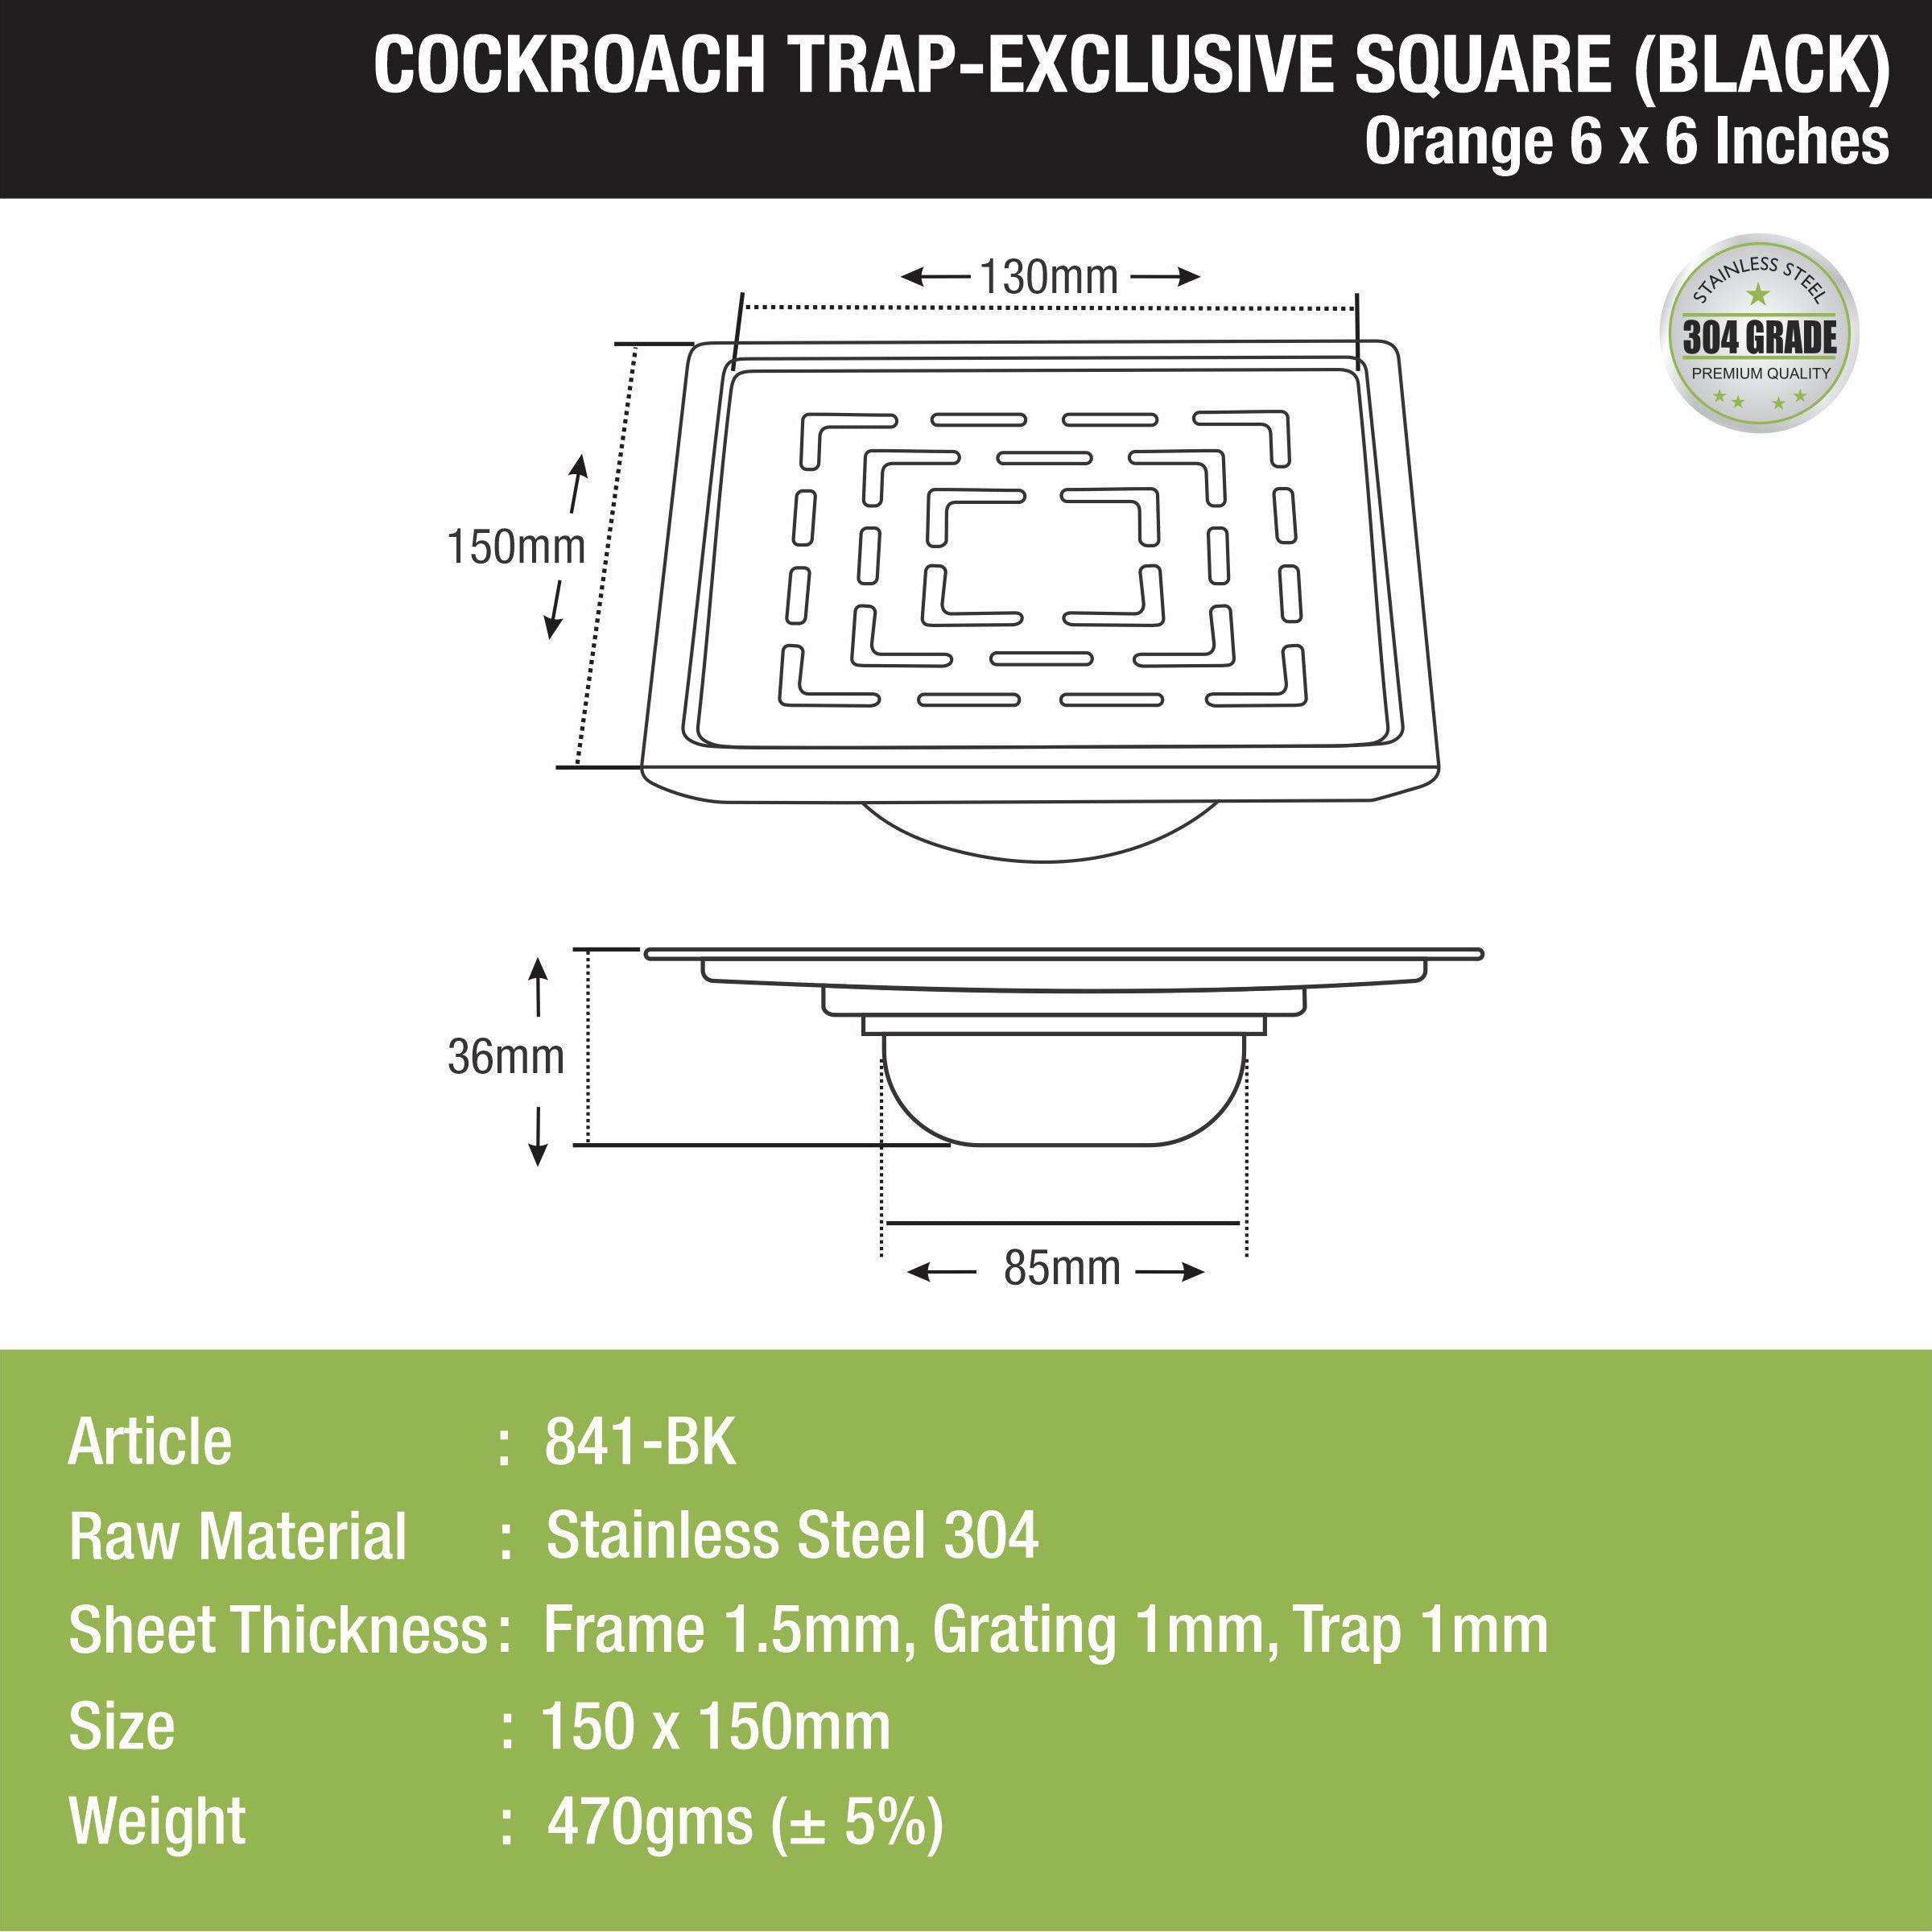 Orange Exclusive Square Floor Drain in Black PVD Coating (6 x 6 Inches) with Cockroach Trap size and measurement